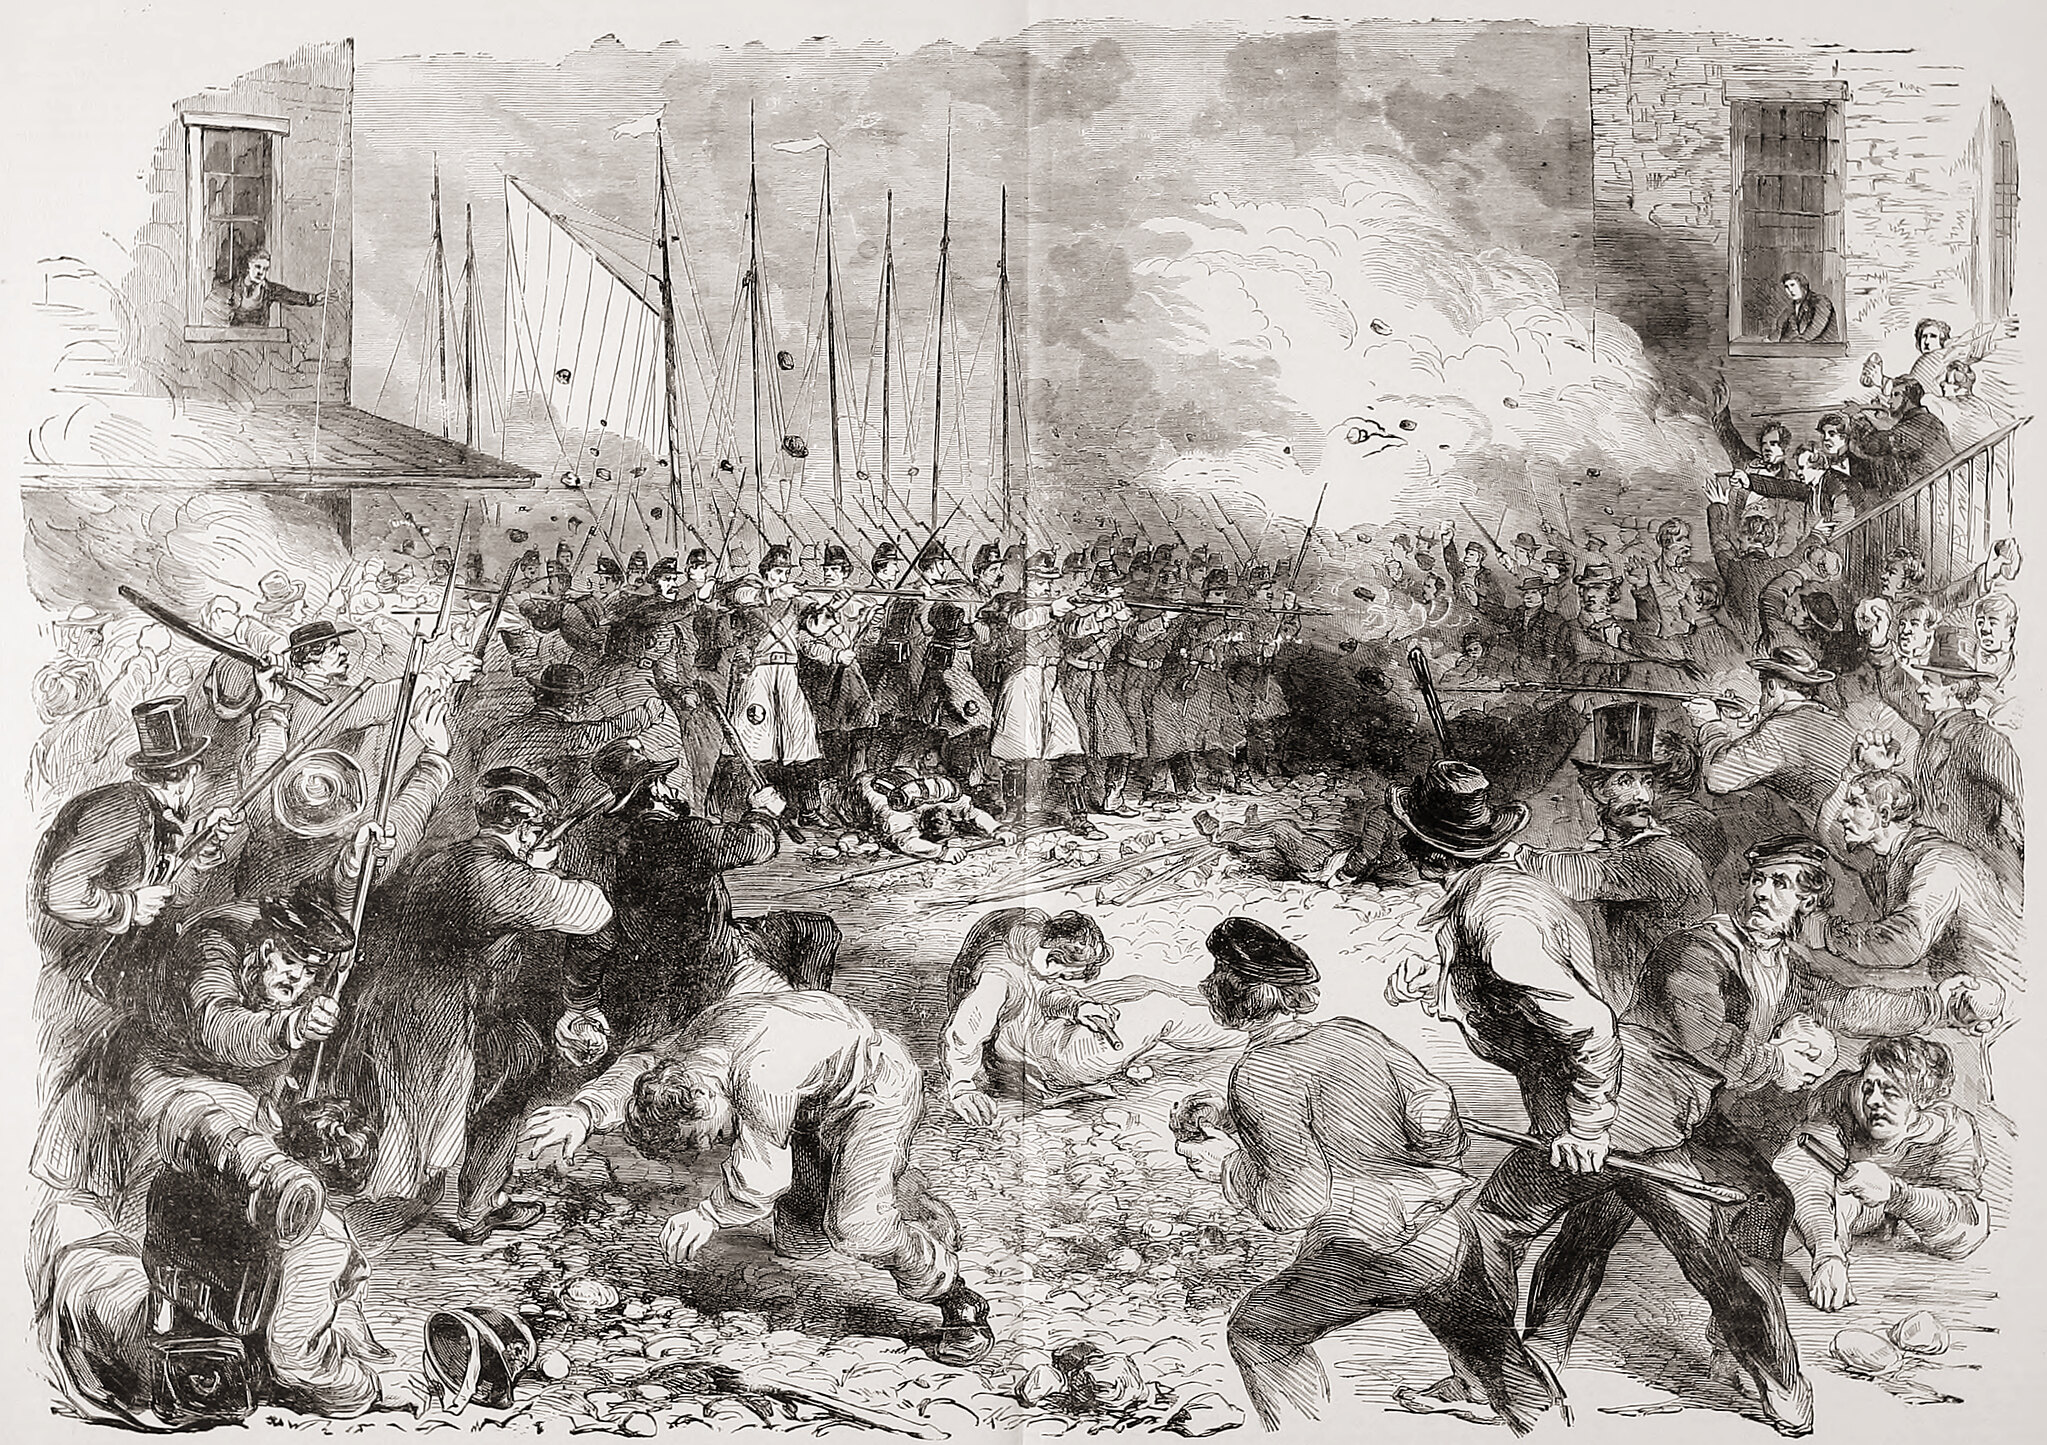 The Sixth Massachusetts Regiment Repelling the Attack of the Mob in Pratt Street, Baltimore, April 19th, 1861